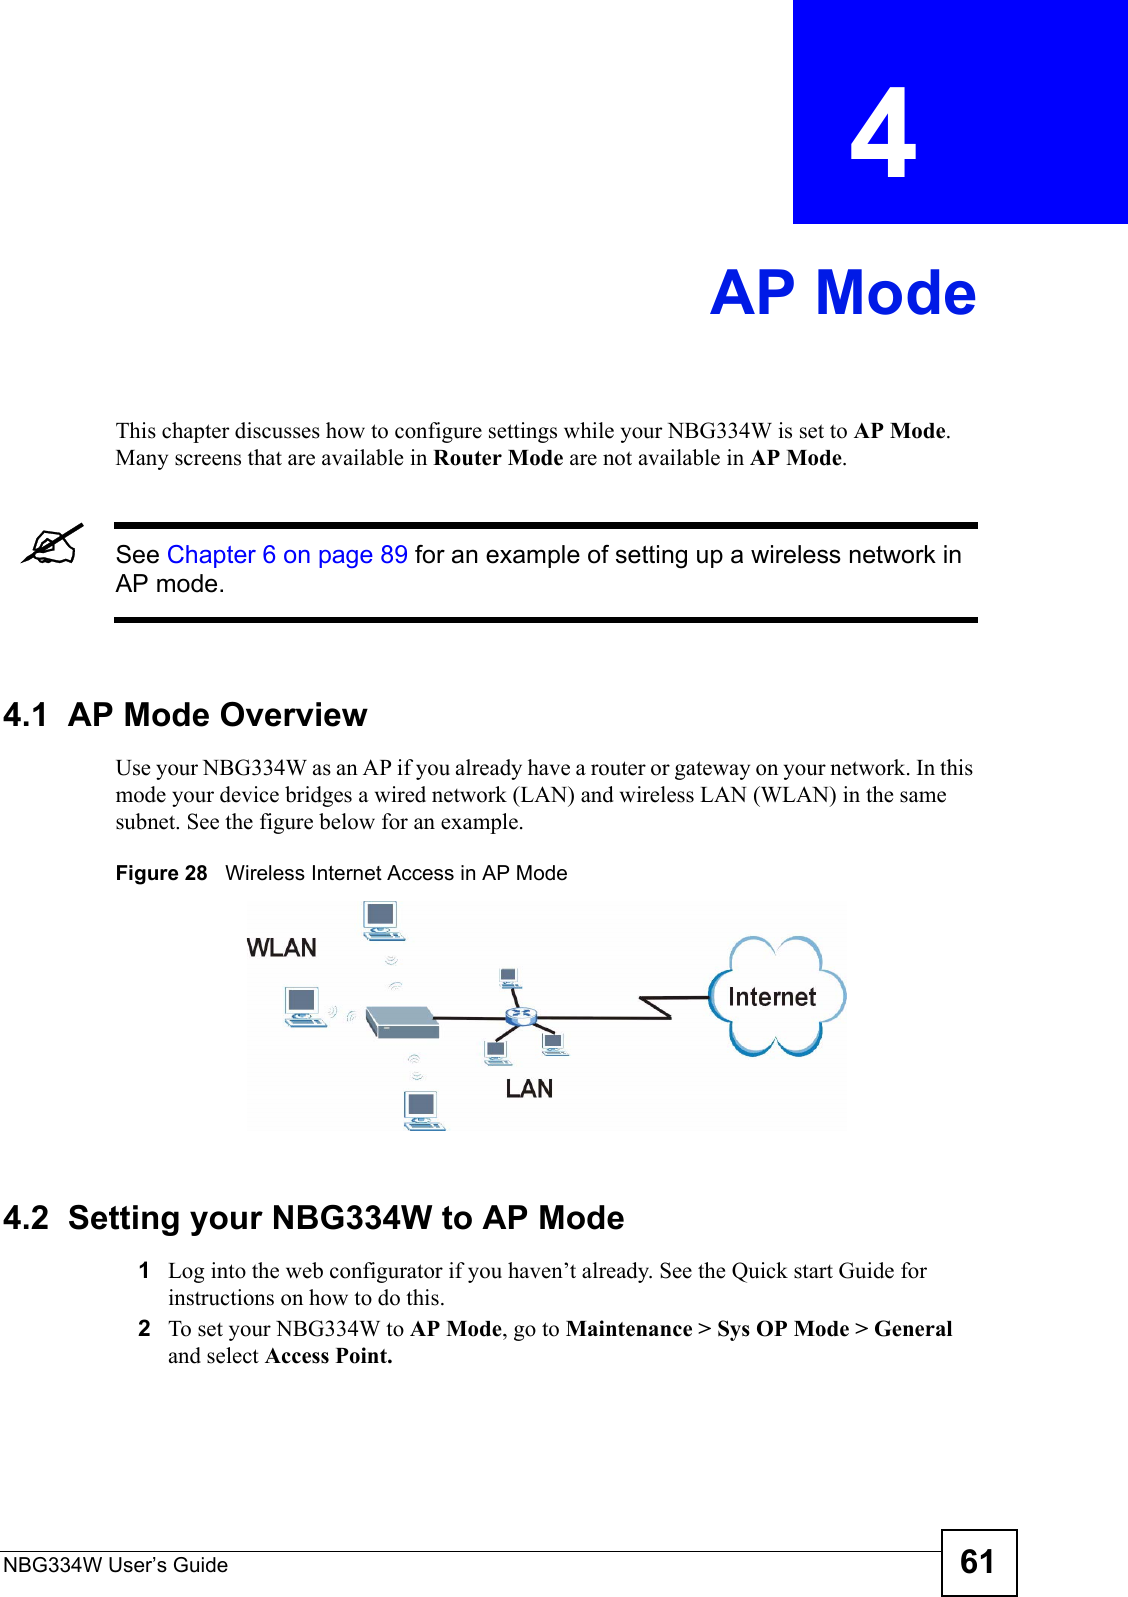 NBG334W User’s Guide 61CHAPTER  4 AP ModeThis chapter discusses how to configure settings while your NBG334W is set to AP Mode. Many screens that are available in Router Mode are not available in AP Mode.&quot;See Chapter 6 on page 89 for an example of setting up a wireless network in AP mode. 4.1  AP Mode OverviewUse your NBG334W as an AP if you already have a router or gateway on your network. In this mode your device bridges a wired network (LAN) and wireless LAN (WLAN) in the same subnet. See the figure below for an example.Figure 28   Wireless Internet Access in AP Mode 4.2  Setting your NBG334W to AP Mode1Log into the web configurator if you haven’t already. See the Quick start Guide for instructions on how to do this.2To set your NBG334W to AP Mode, go to Maintenance &gt; Sys OP Mode &gt; General and select Access Point.